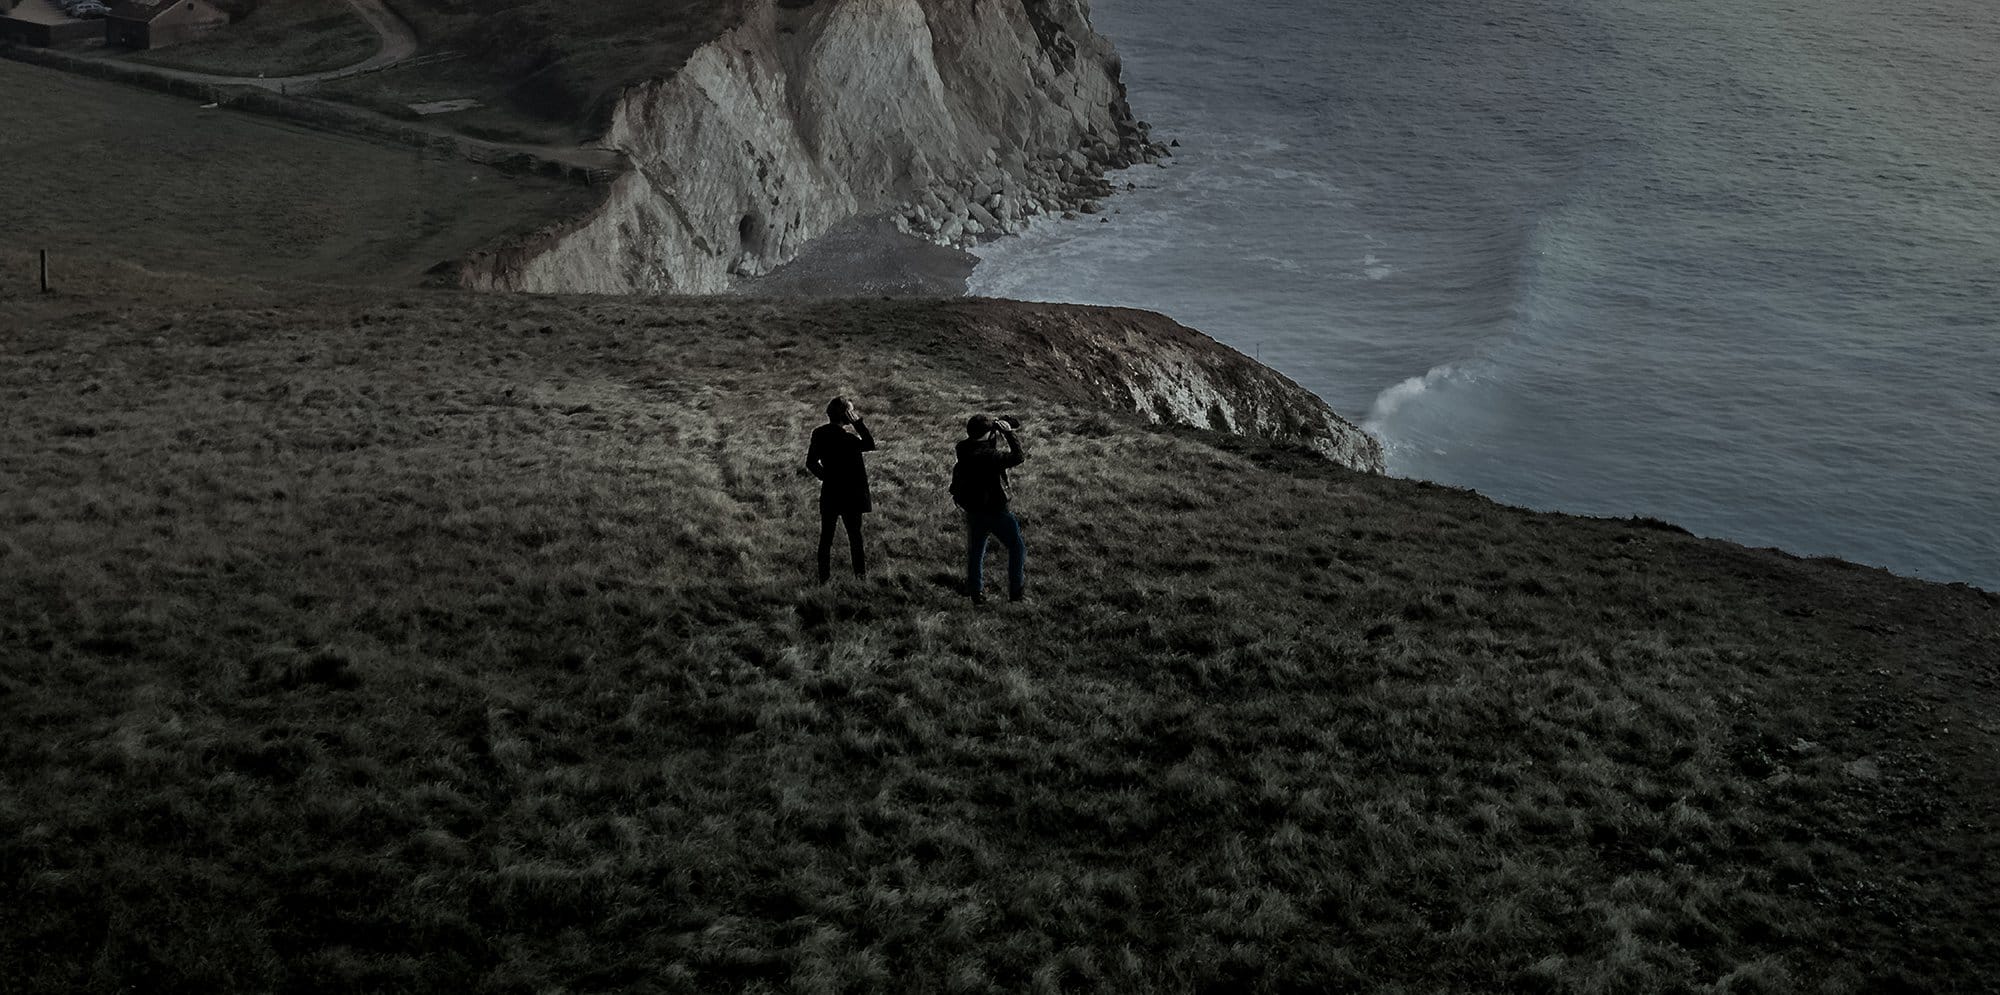 A dark, atmospheric image of a cliffside and coastline. On the land, two silhouette figures look out towards the water.